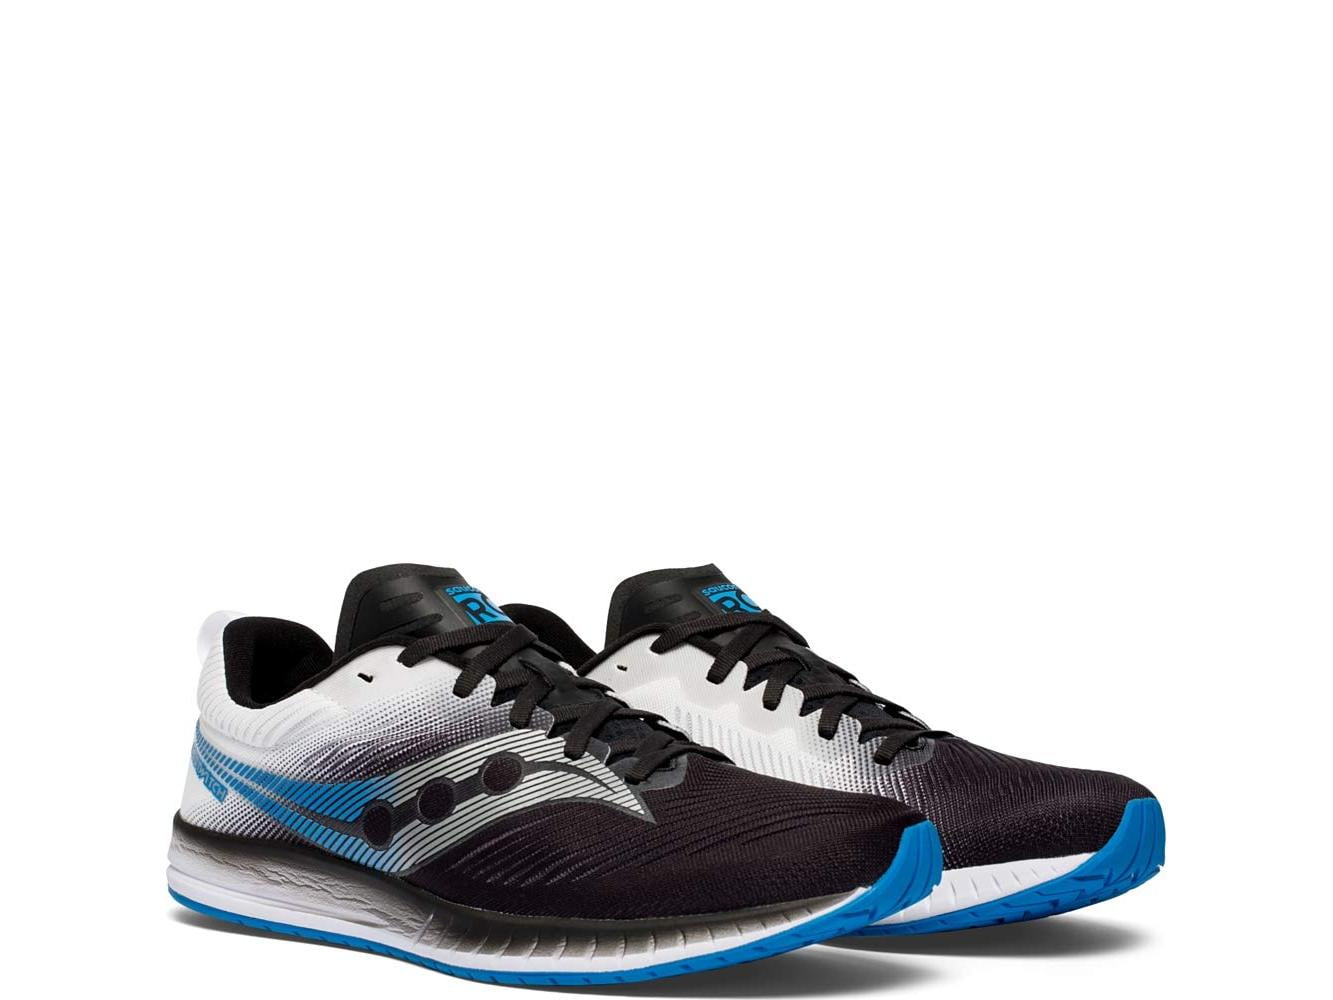 Black Blue White Saucony Mens Fastwitch 9 Running Shoes Trainers Sneakers 